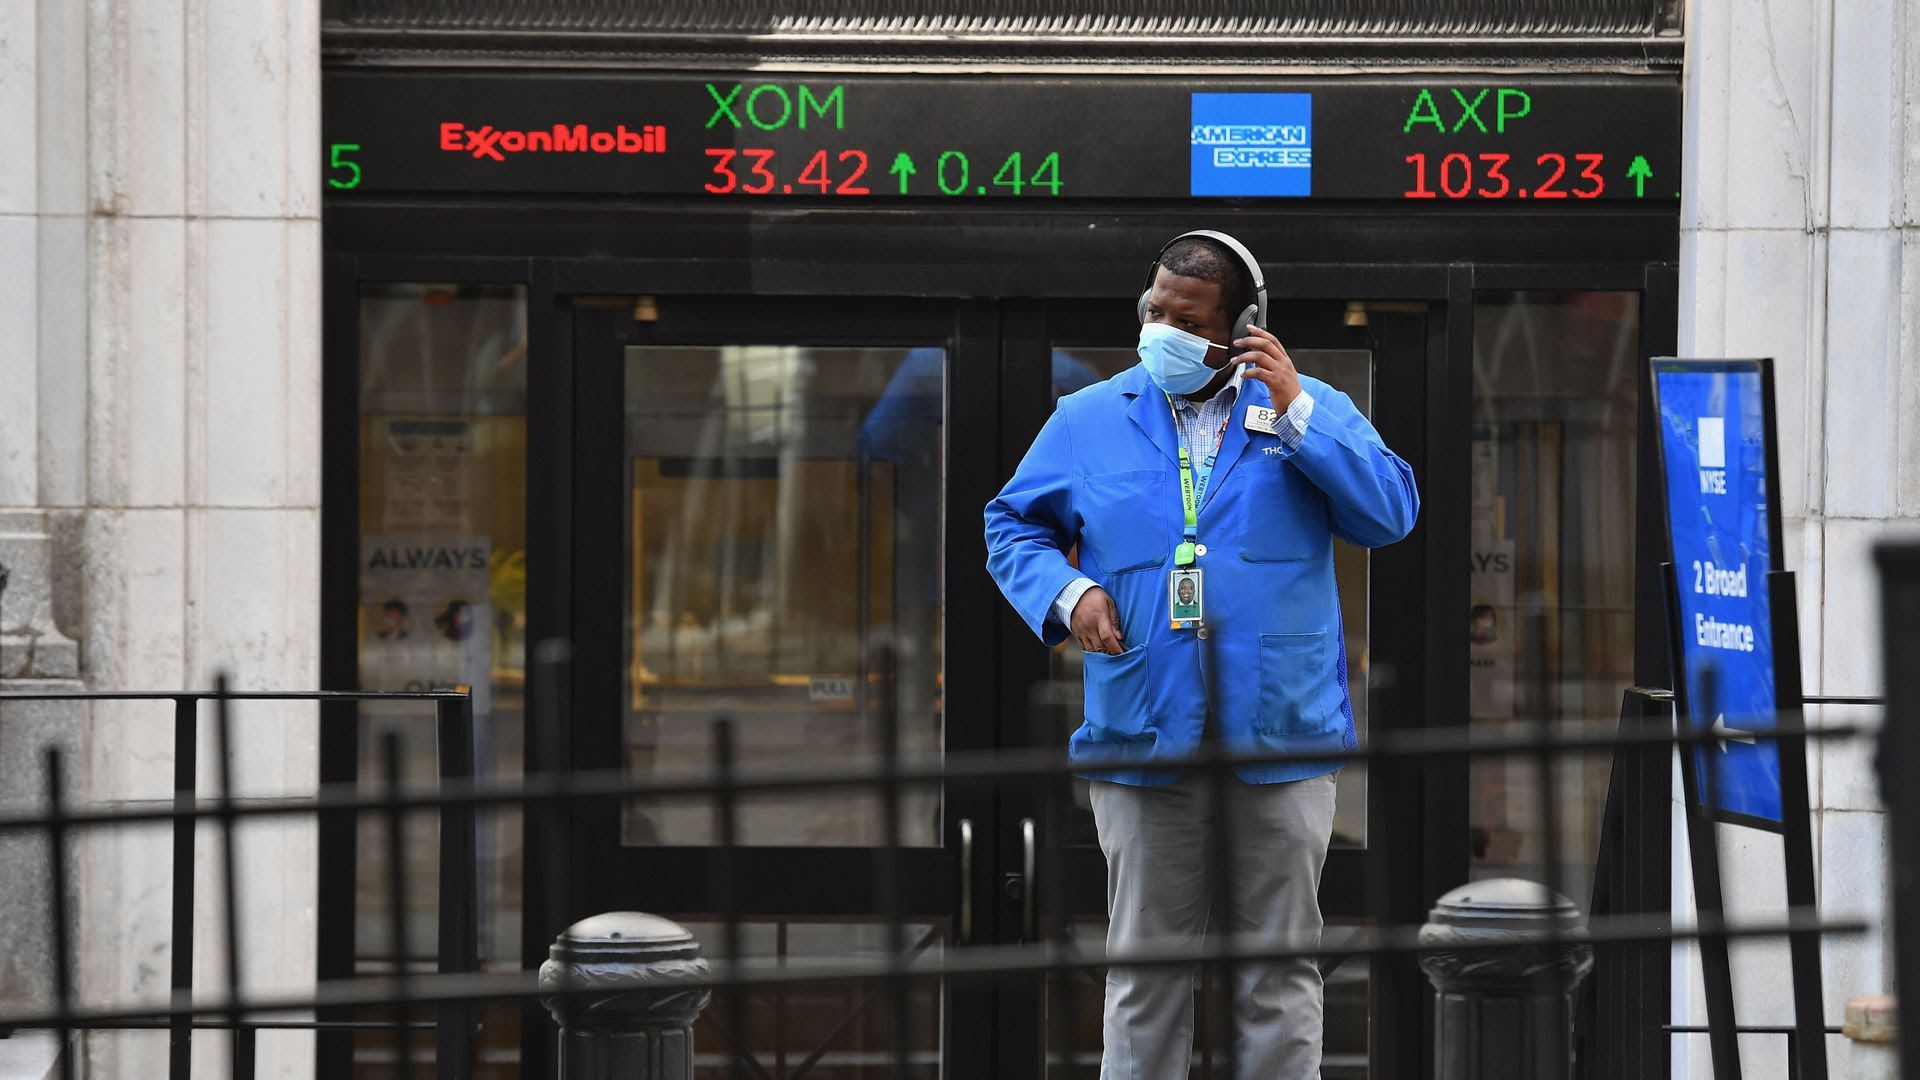 A trader in front of the stock exchange.